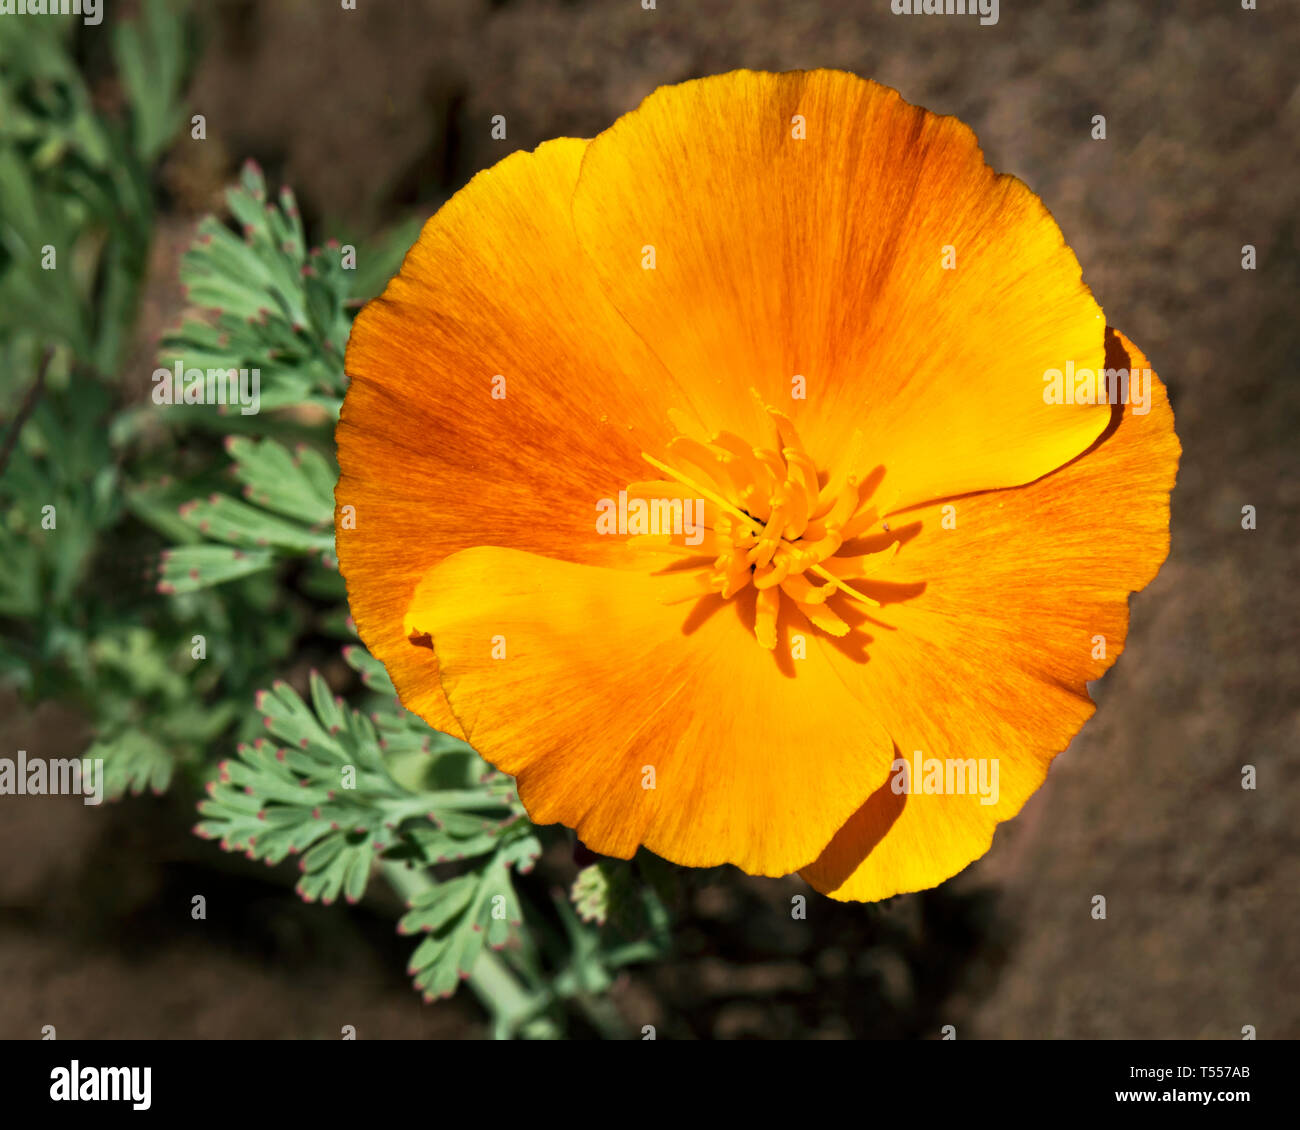 a gold california poppy with red streaks in the petals on a background of blurry soil and leaves Stock Photo